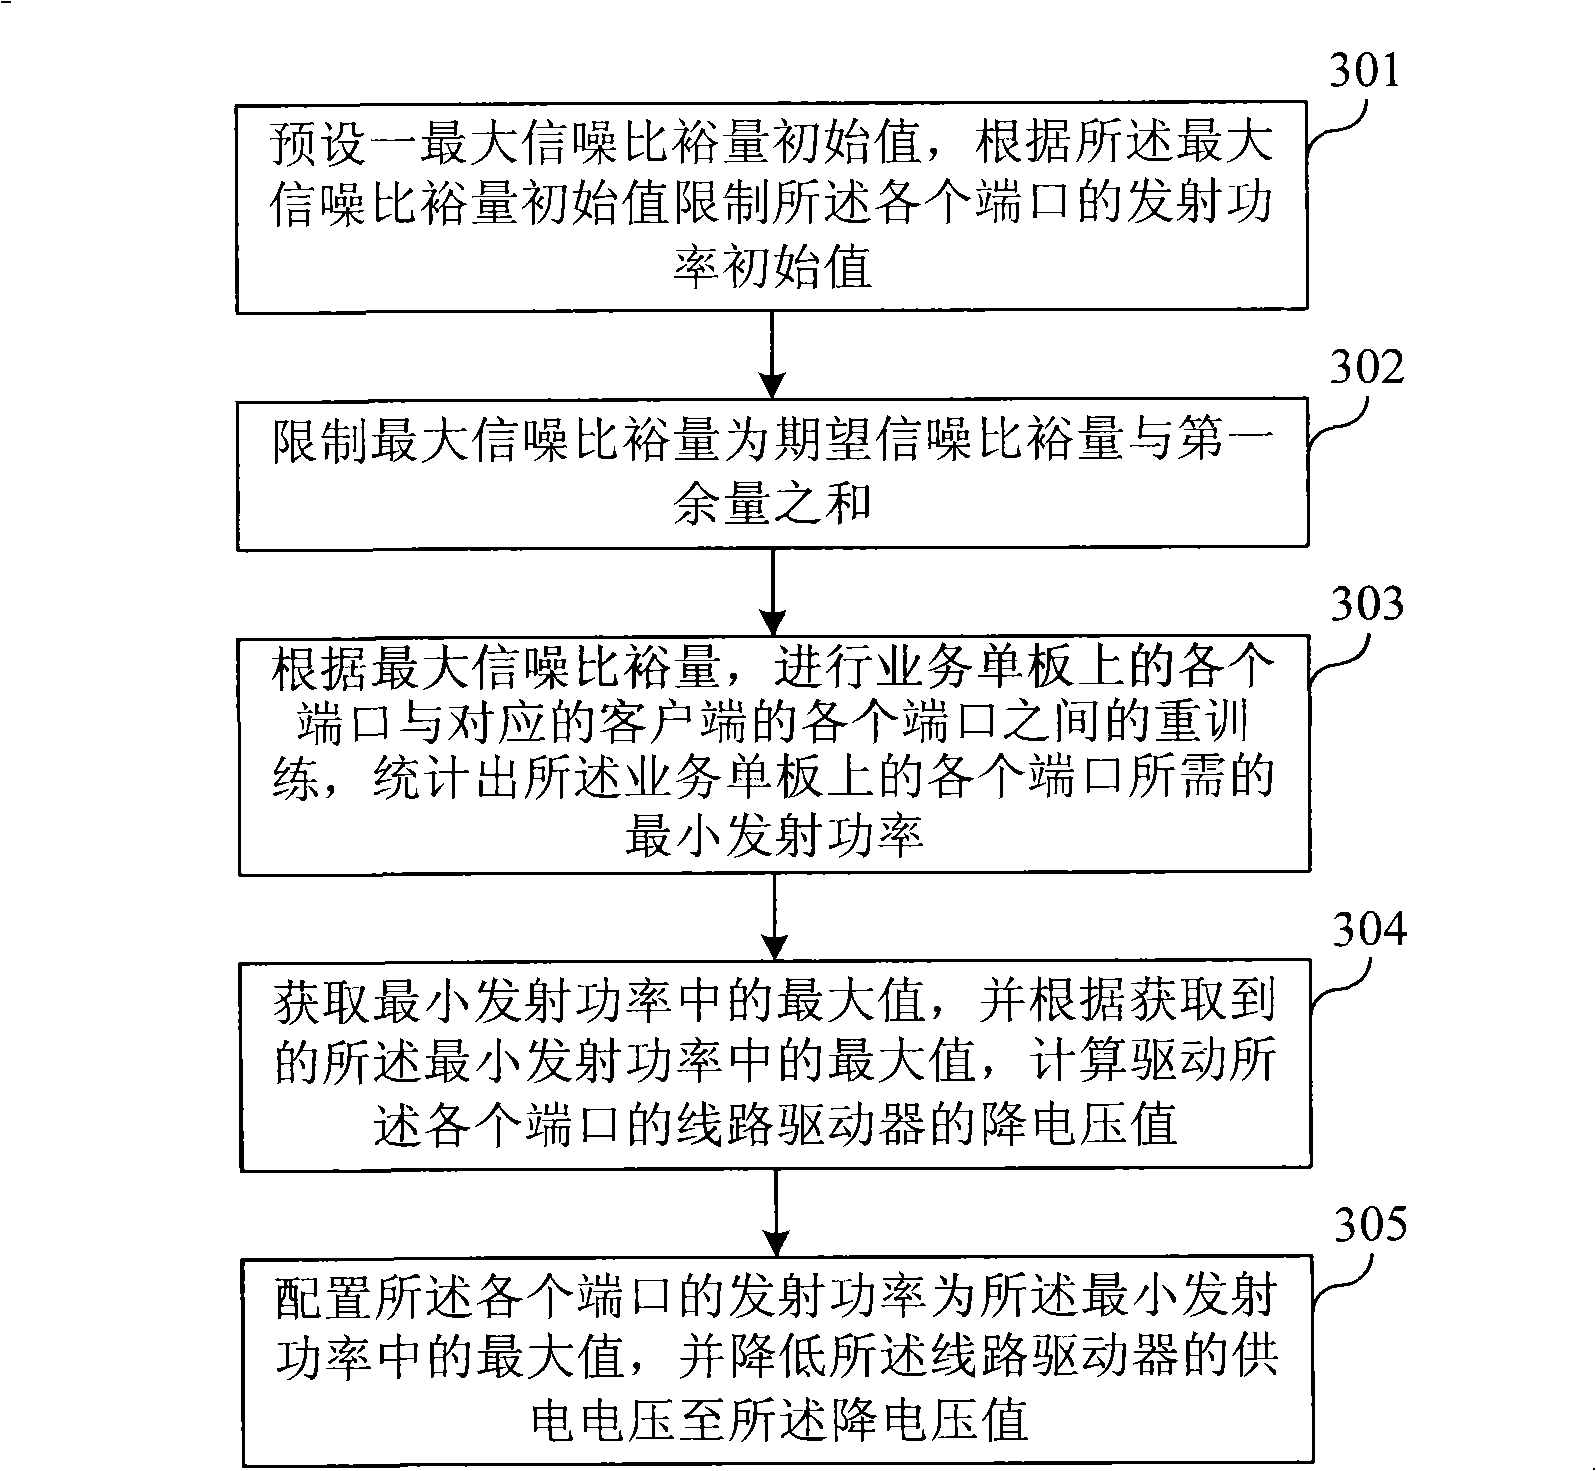 Method and device for reducing x digital subscriber line (DSL) system and xDSL system